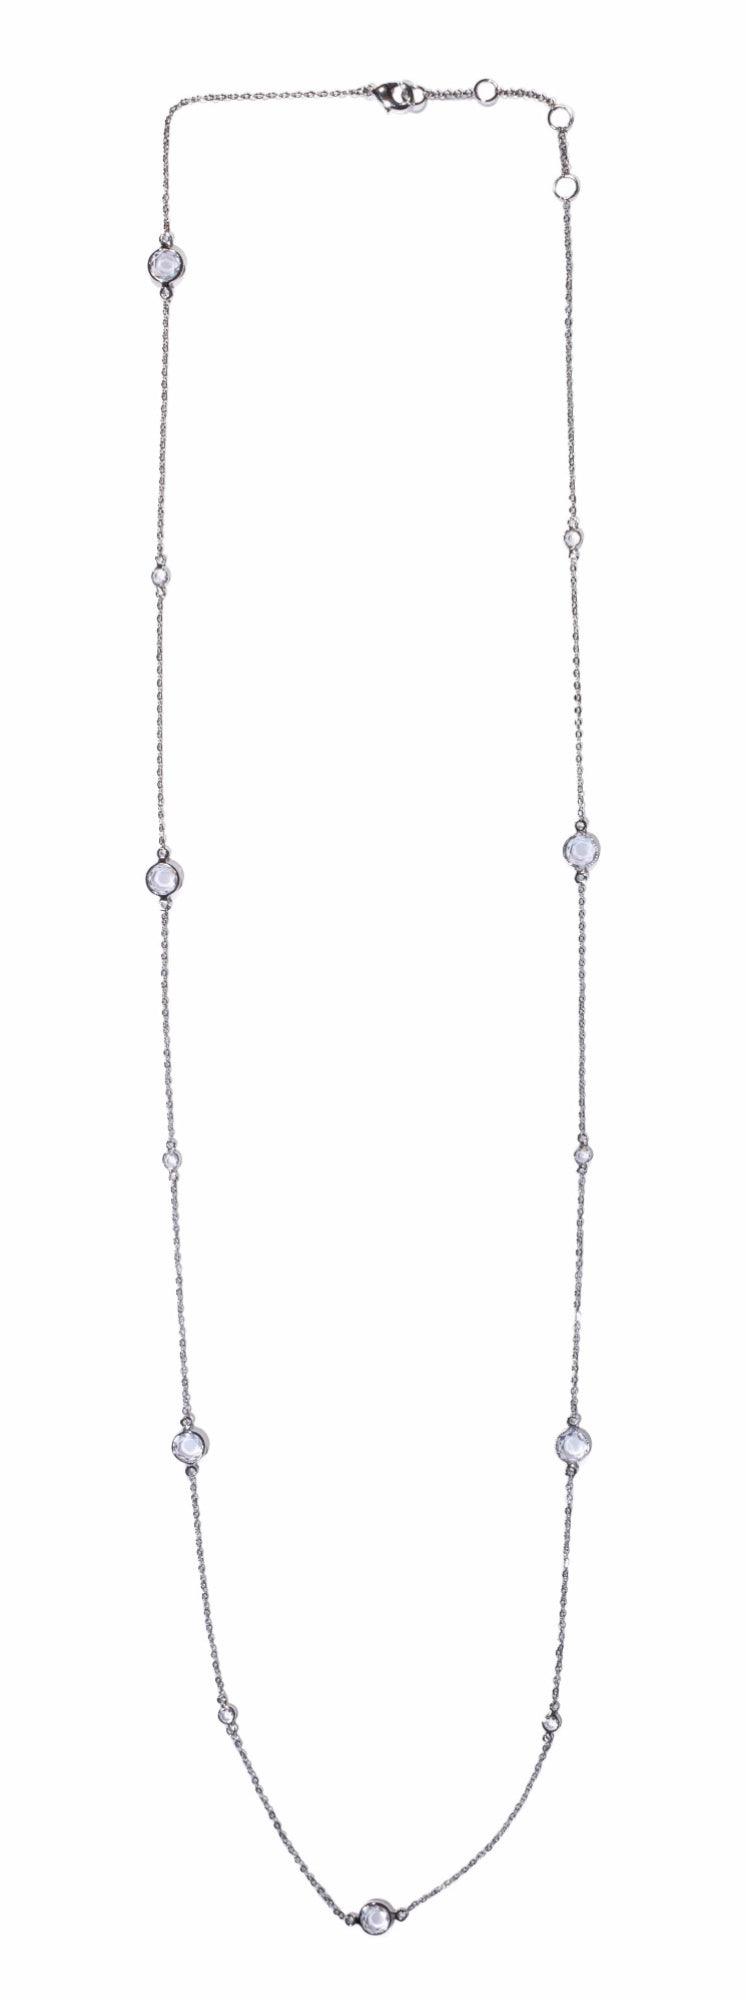 Crystal Drops Necklace - Findings & Connections